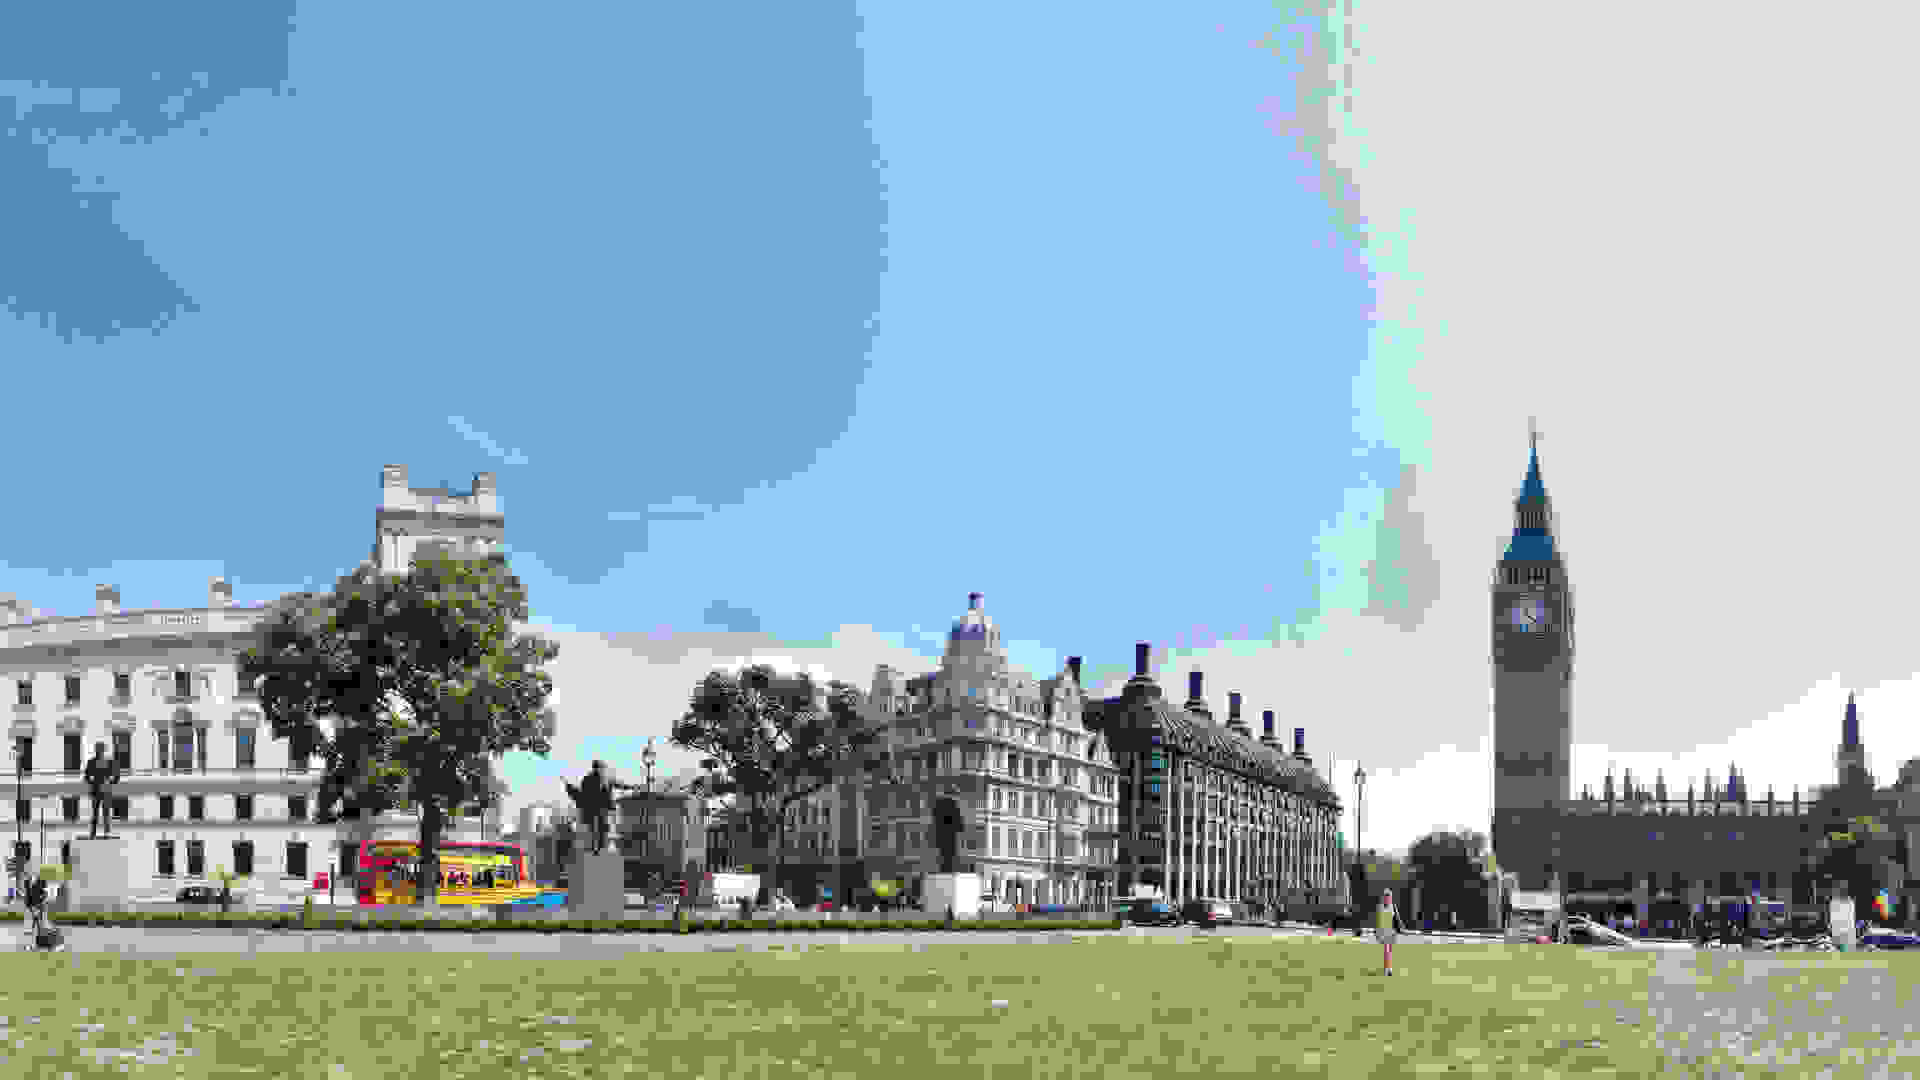 Panoramic photo of Parliament Square, Westminster